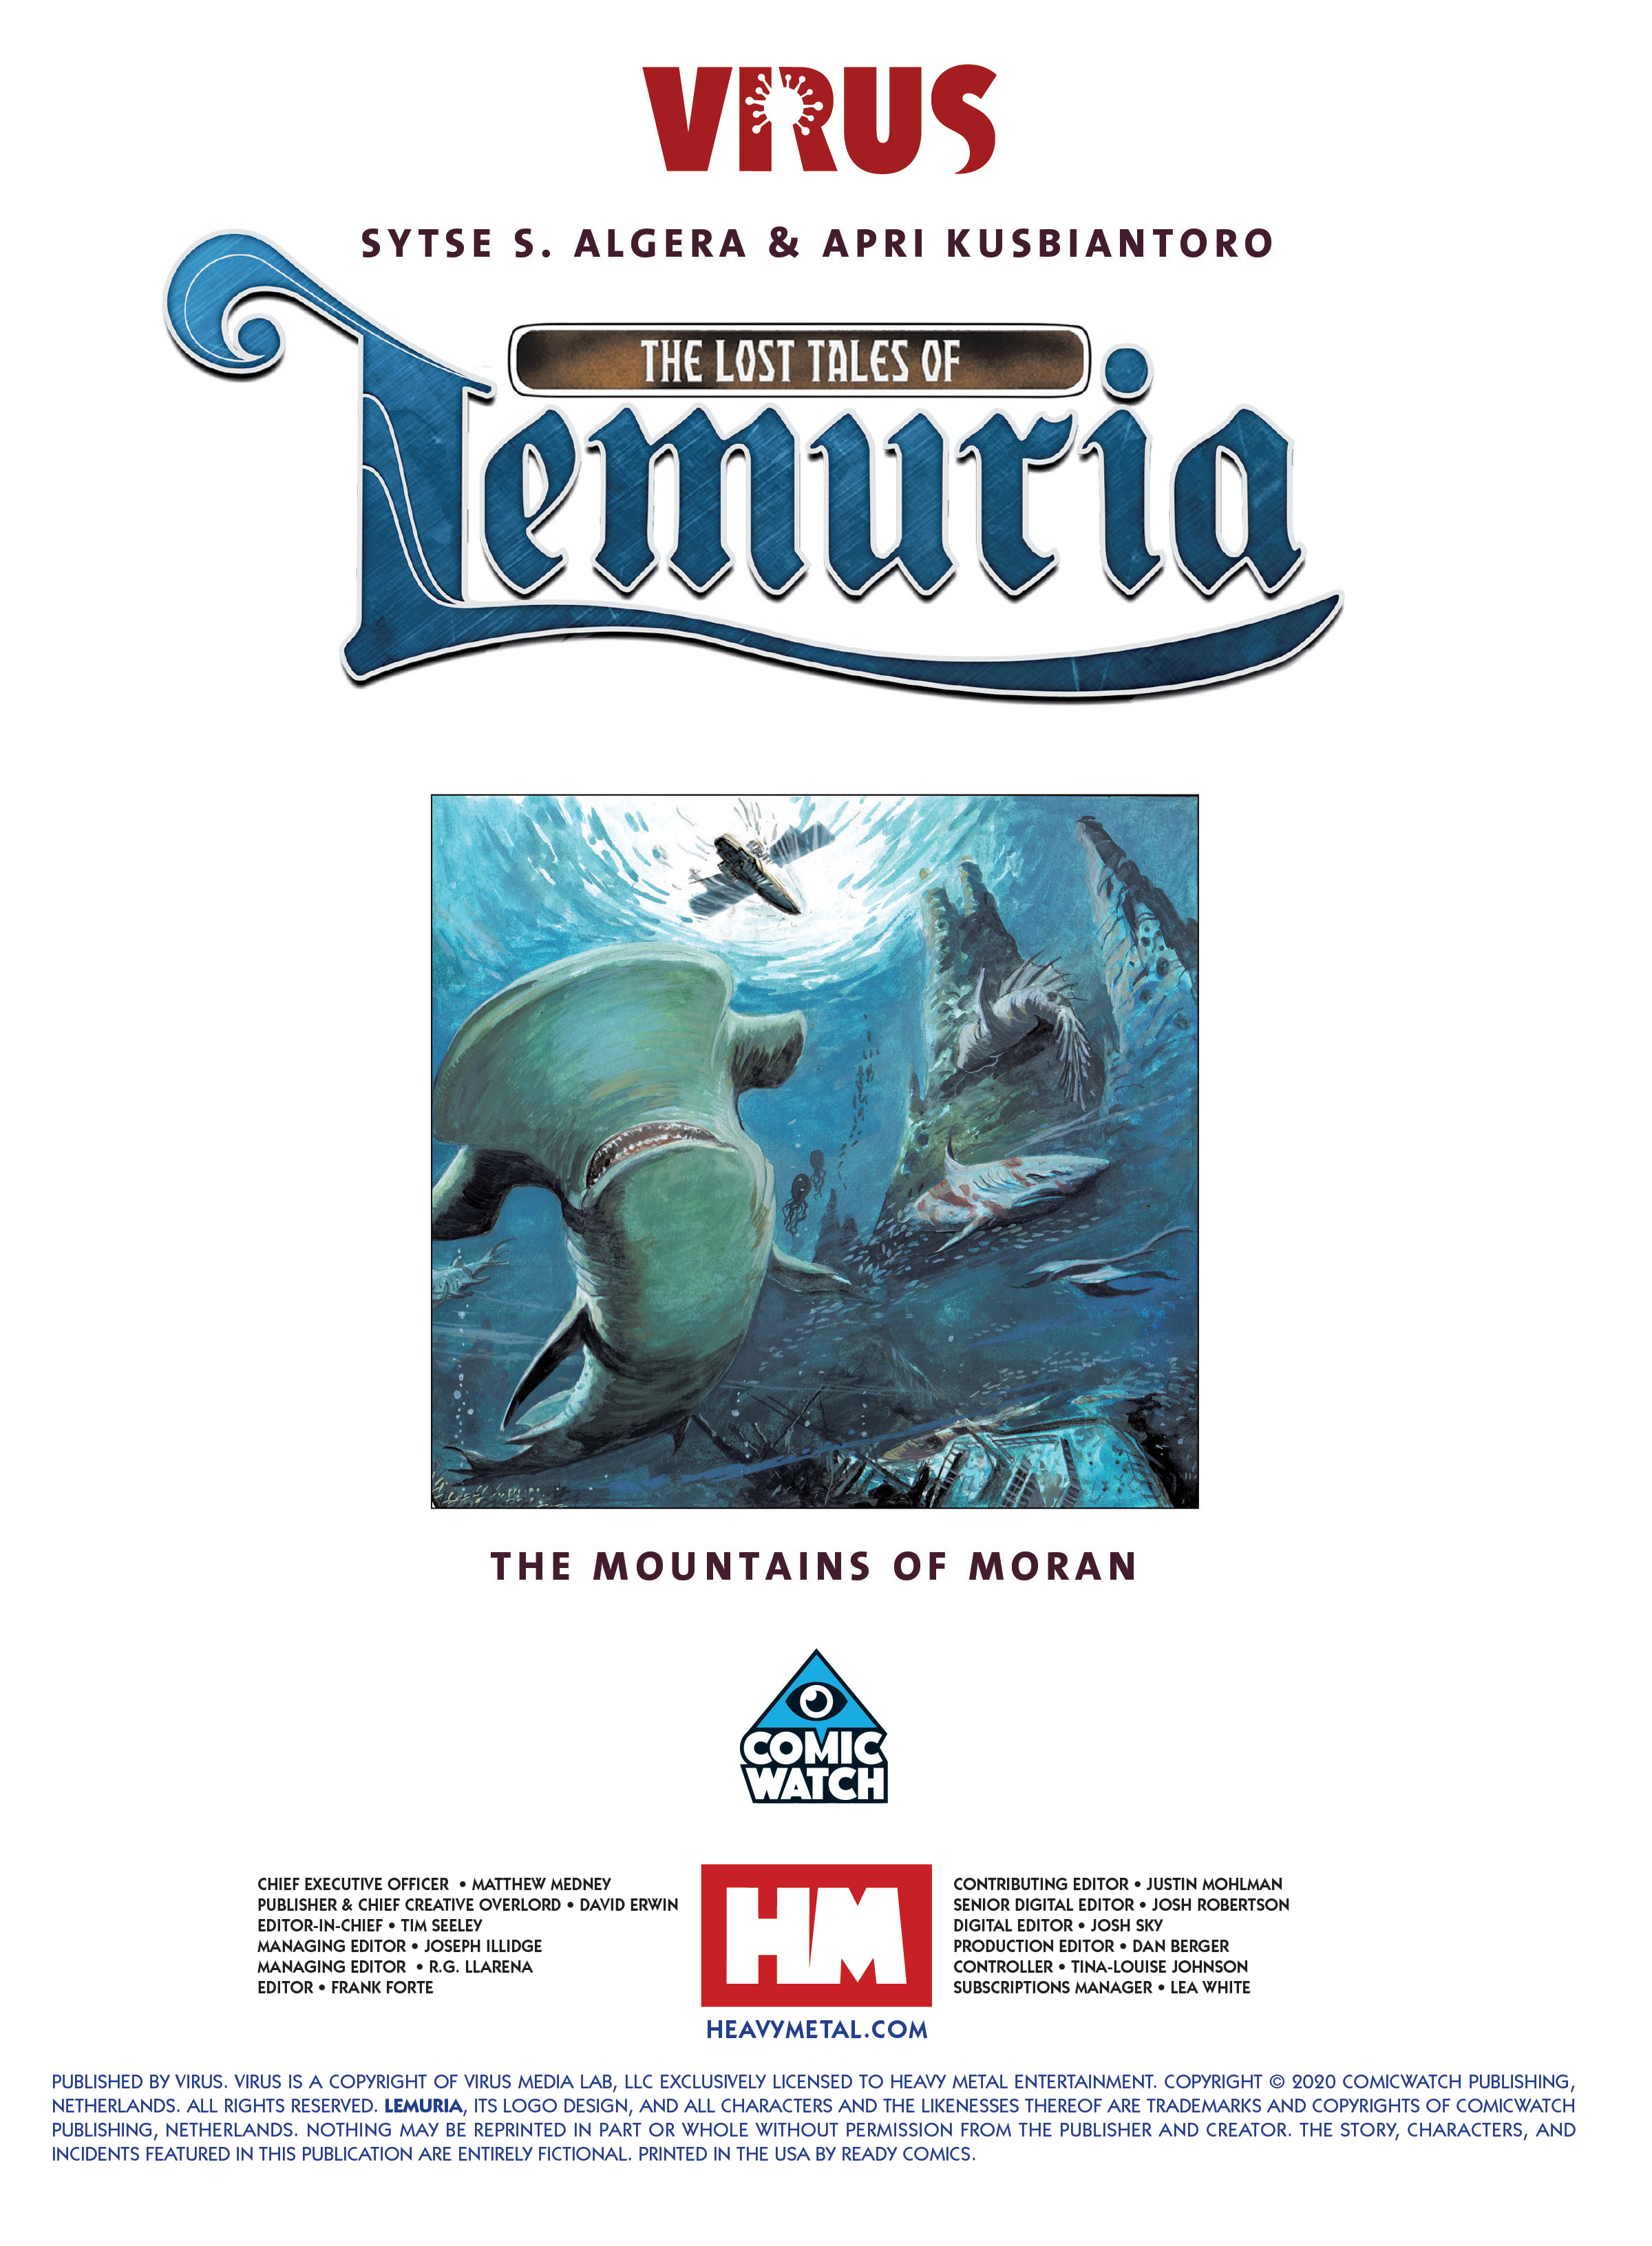 Read online The Lost Tales of Lemuria: The Mountains of Moran comic -  Issue # Full - 2